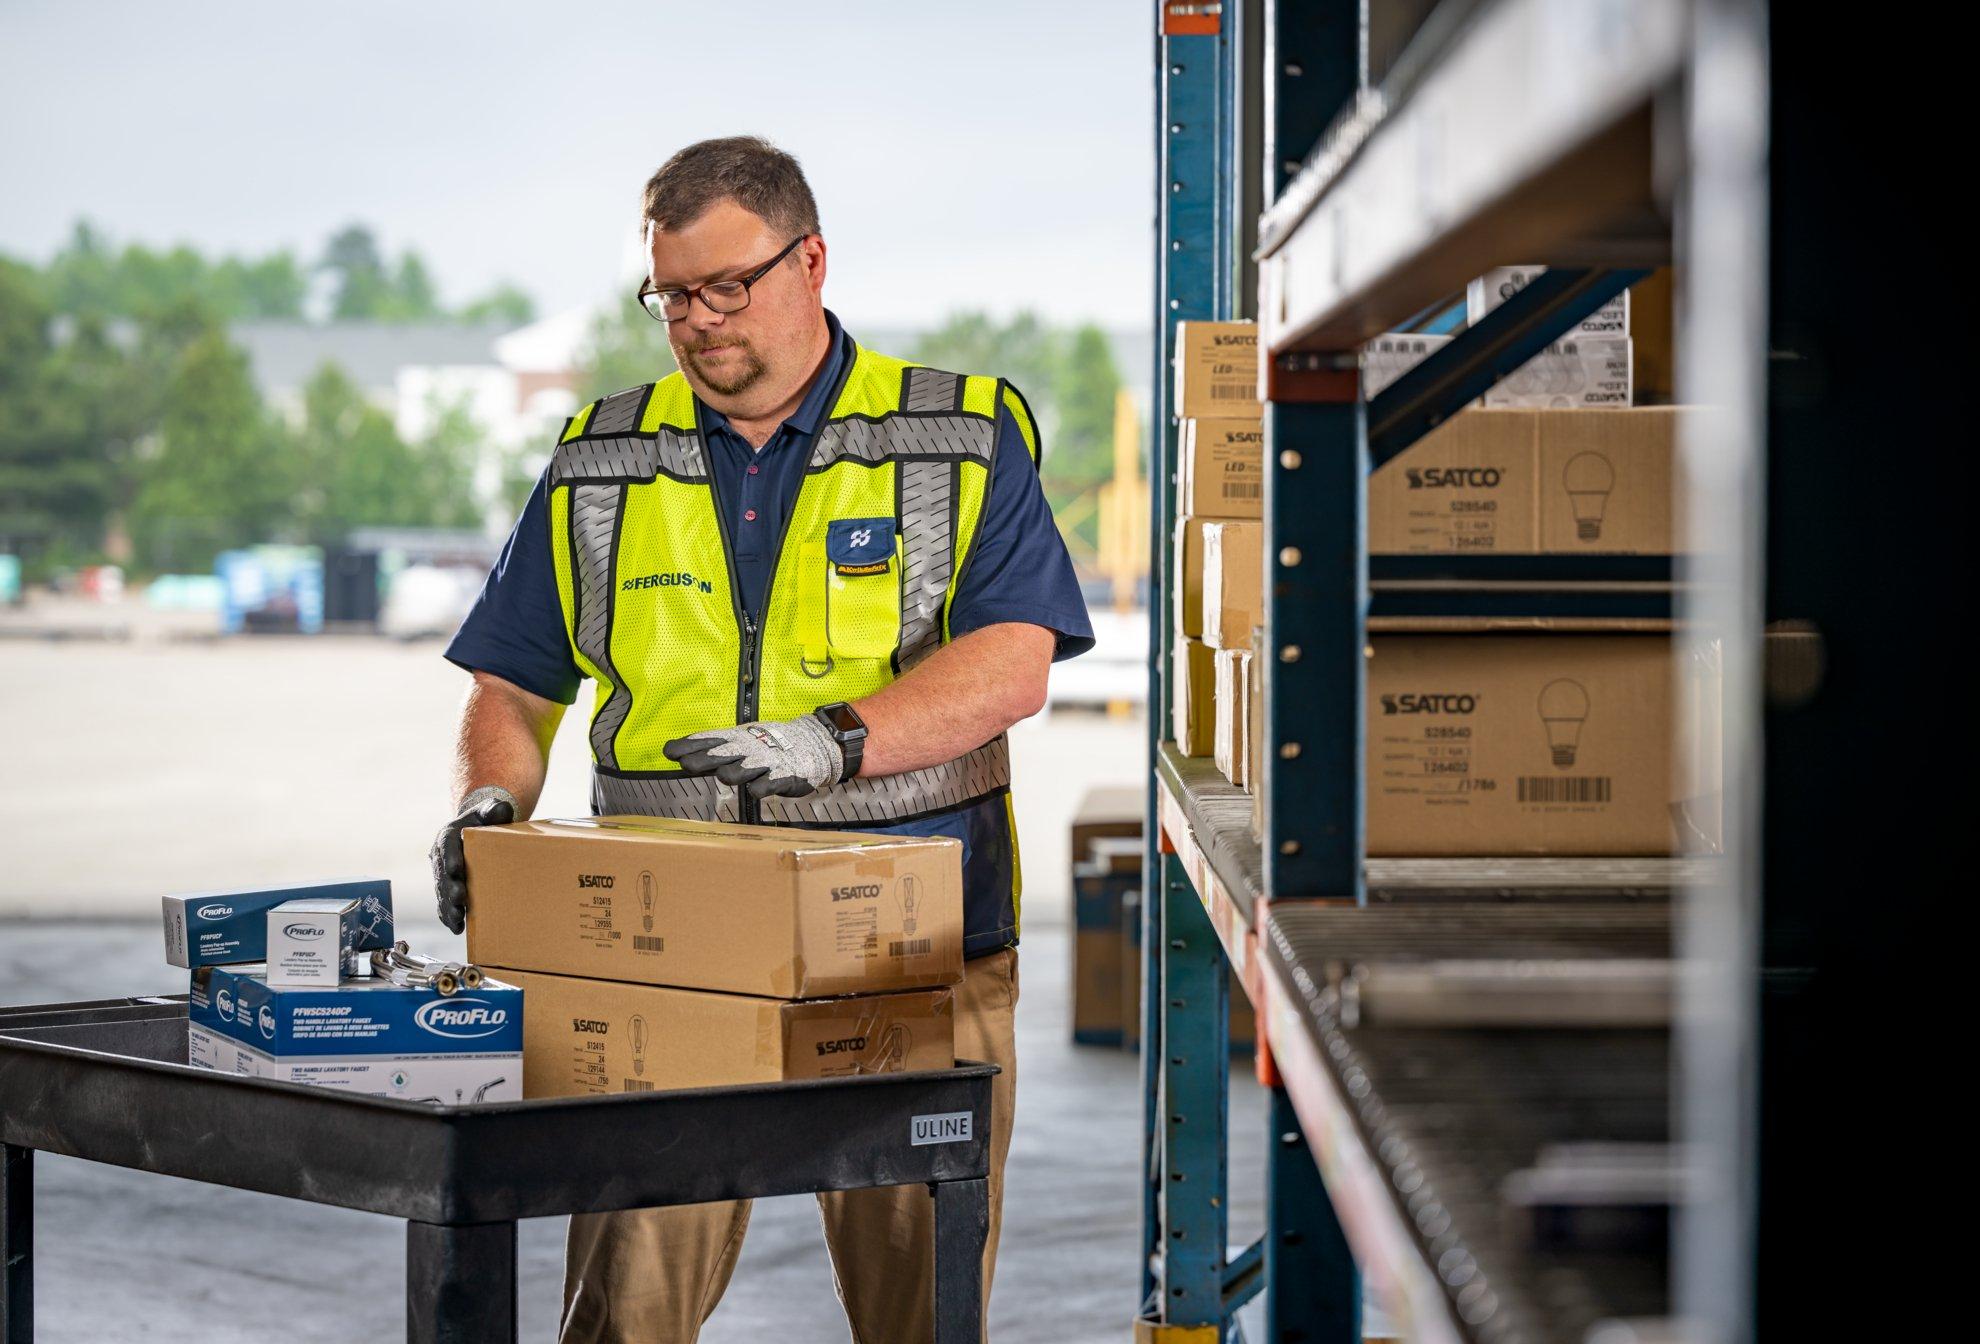 A Ferguson associate in a distribution center loads deliveries of products onto warehouse shelves.